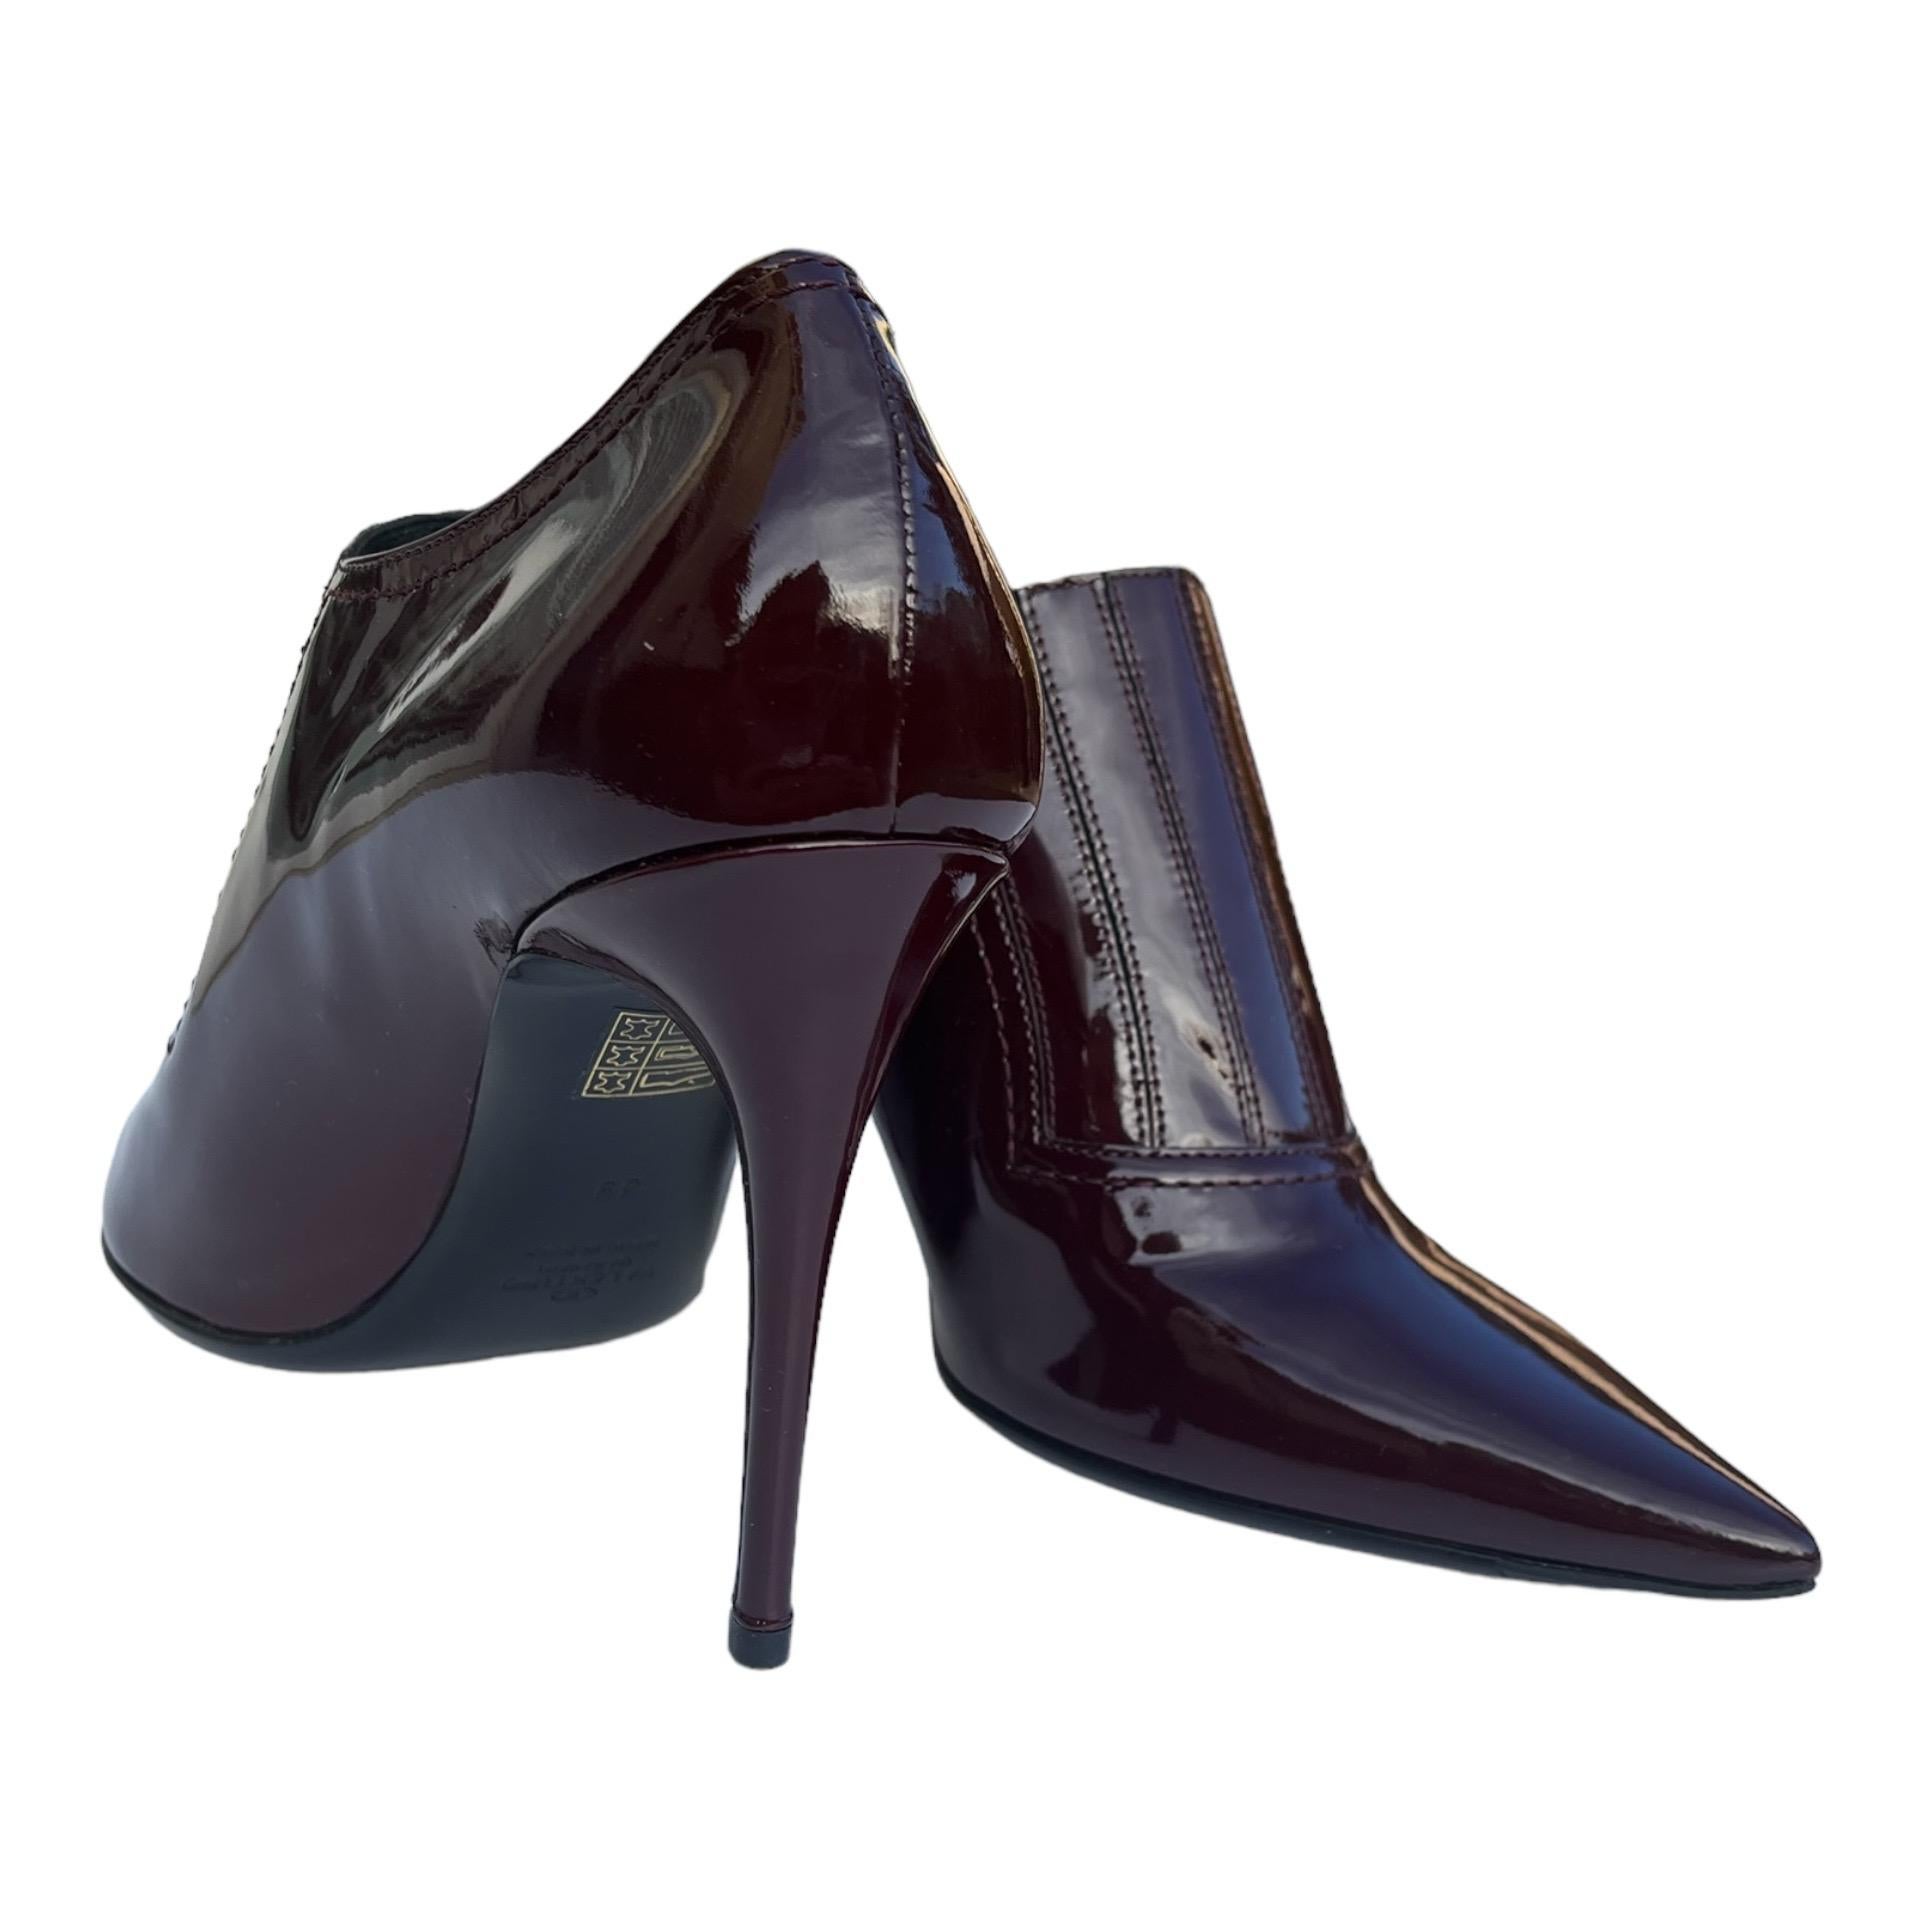 New Valentino Garavani Burgundy Patent Leather Shoes Italian 39 - US 9 In New Condition For Sale In Montgomery, TX